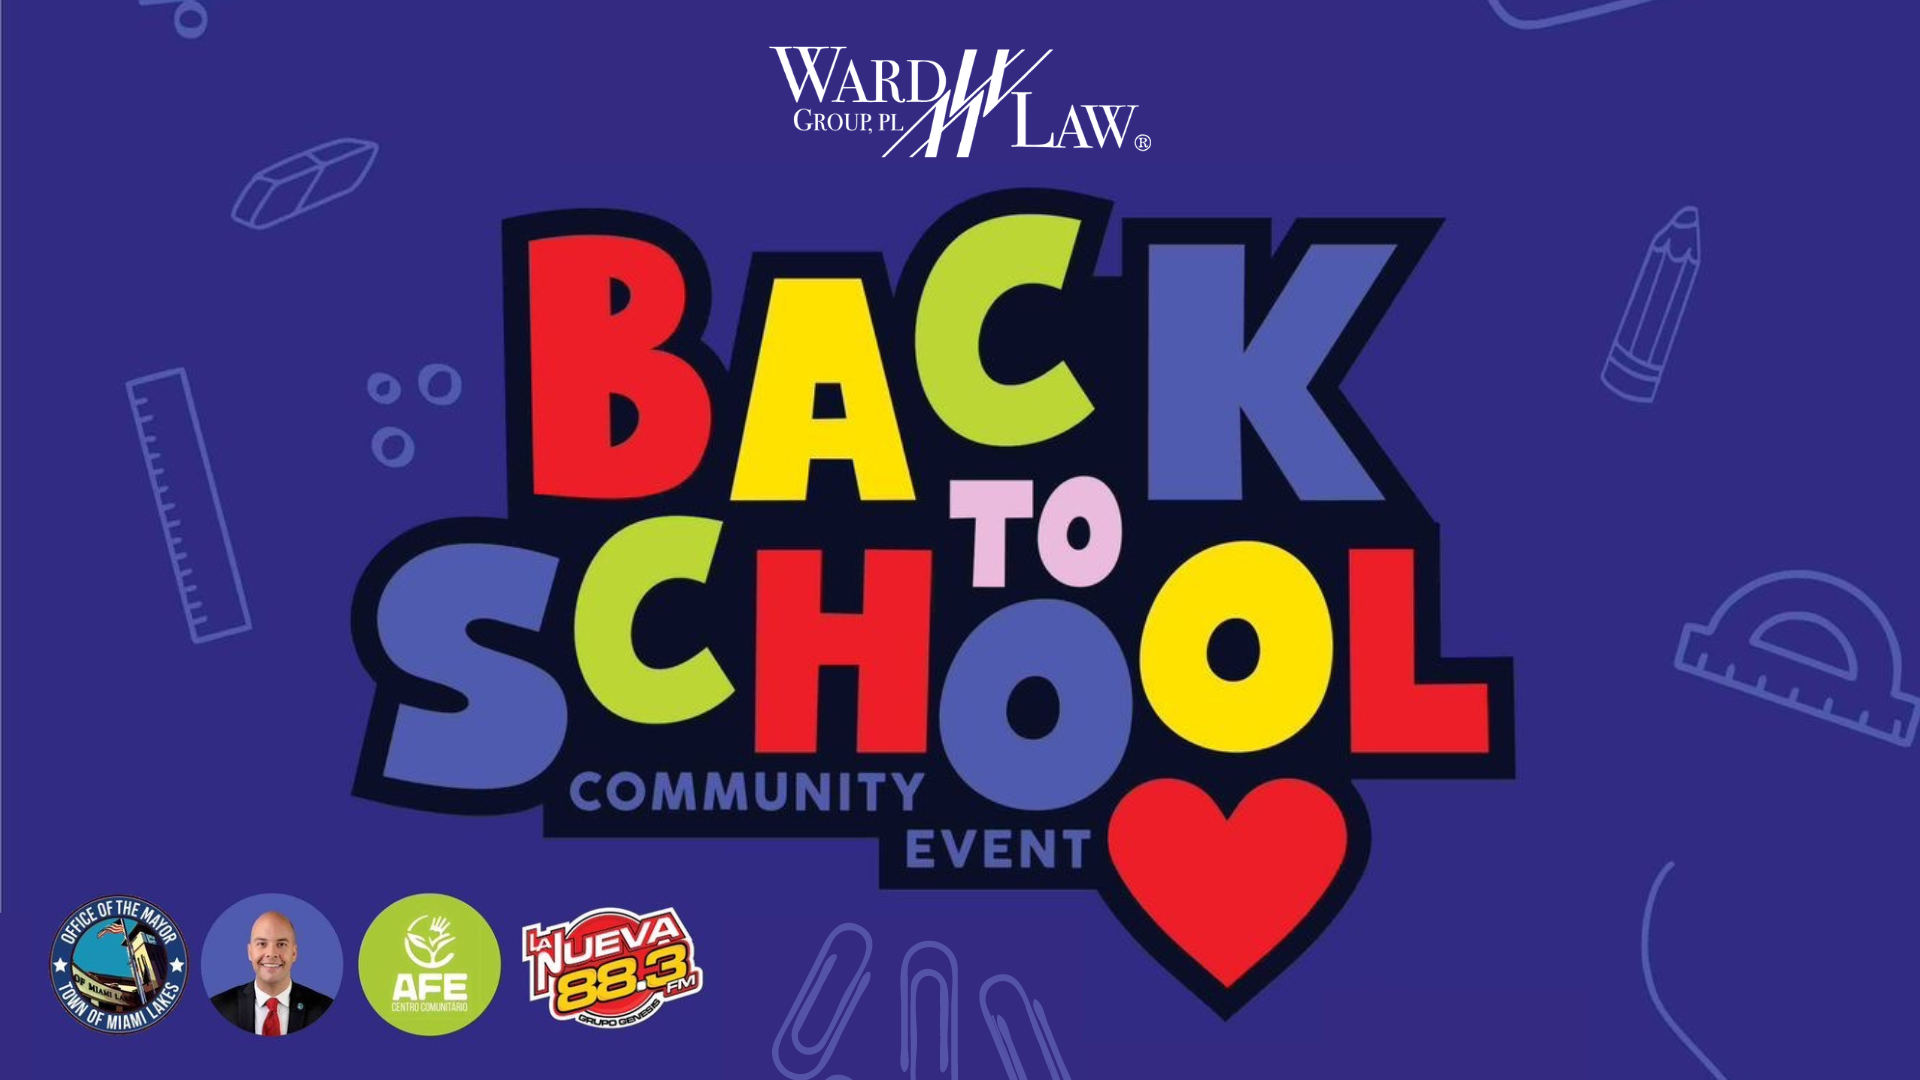 Back to School Community Event hosted by Mayor Cid